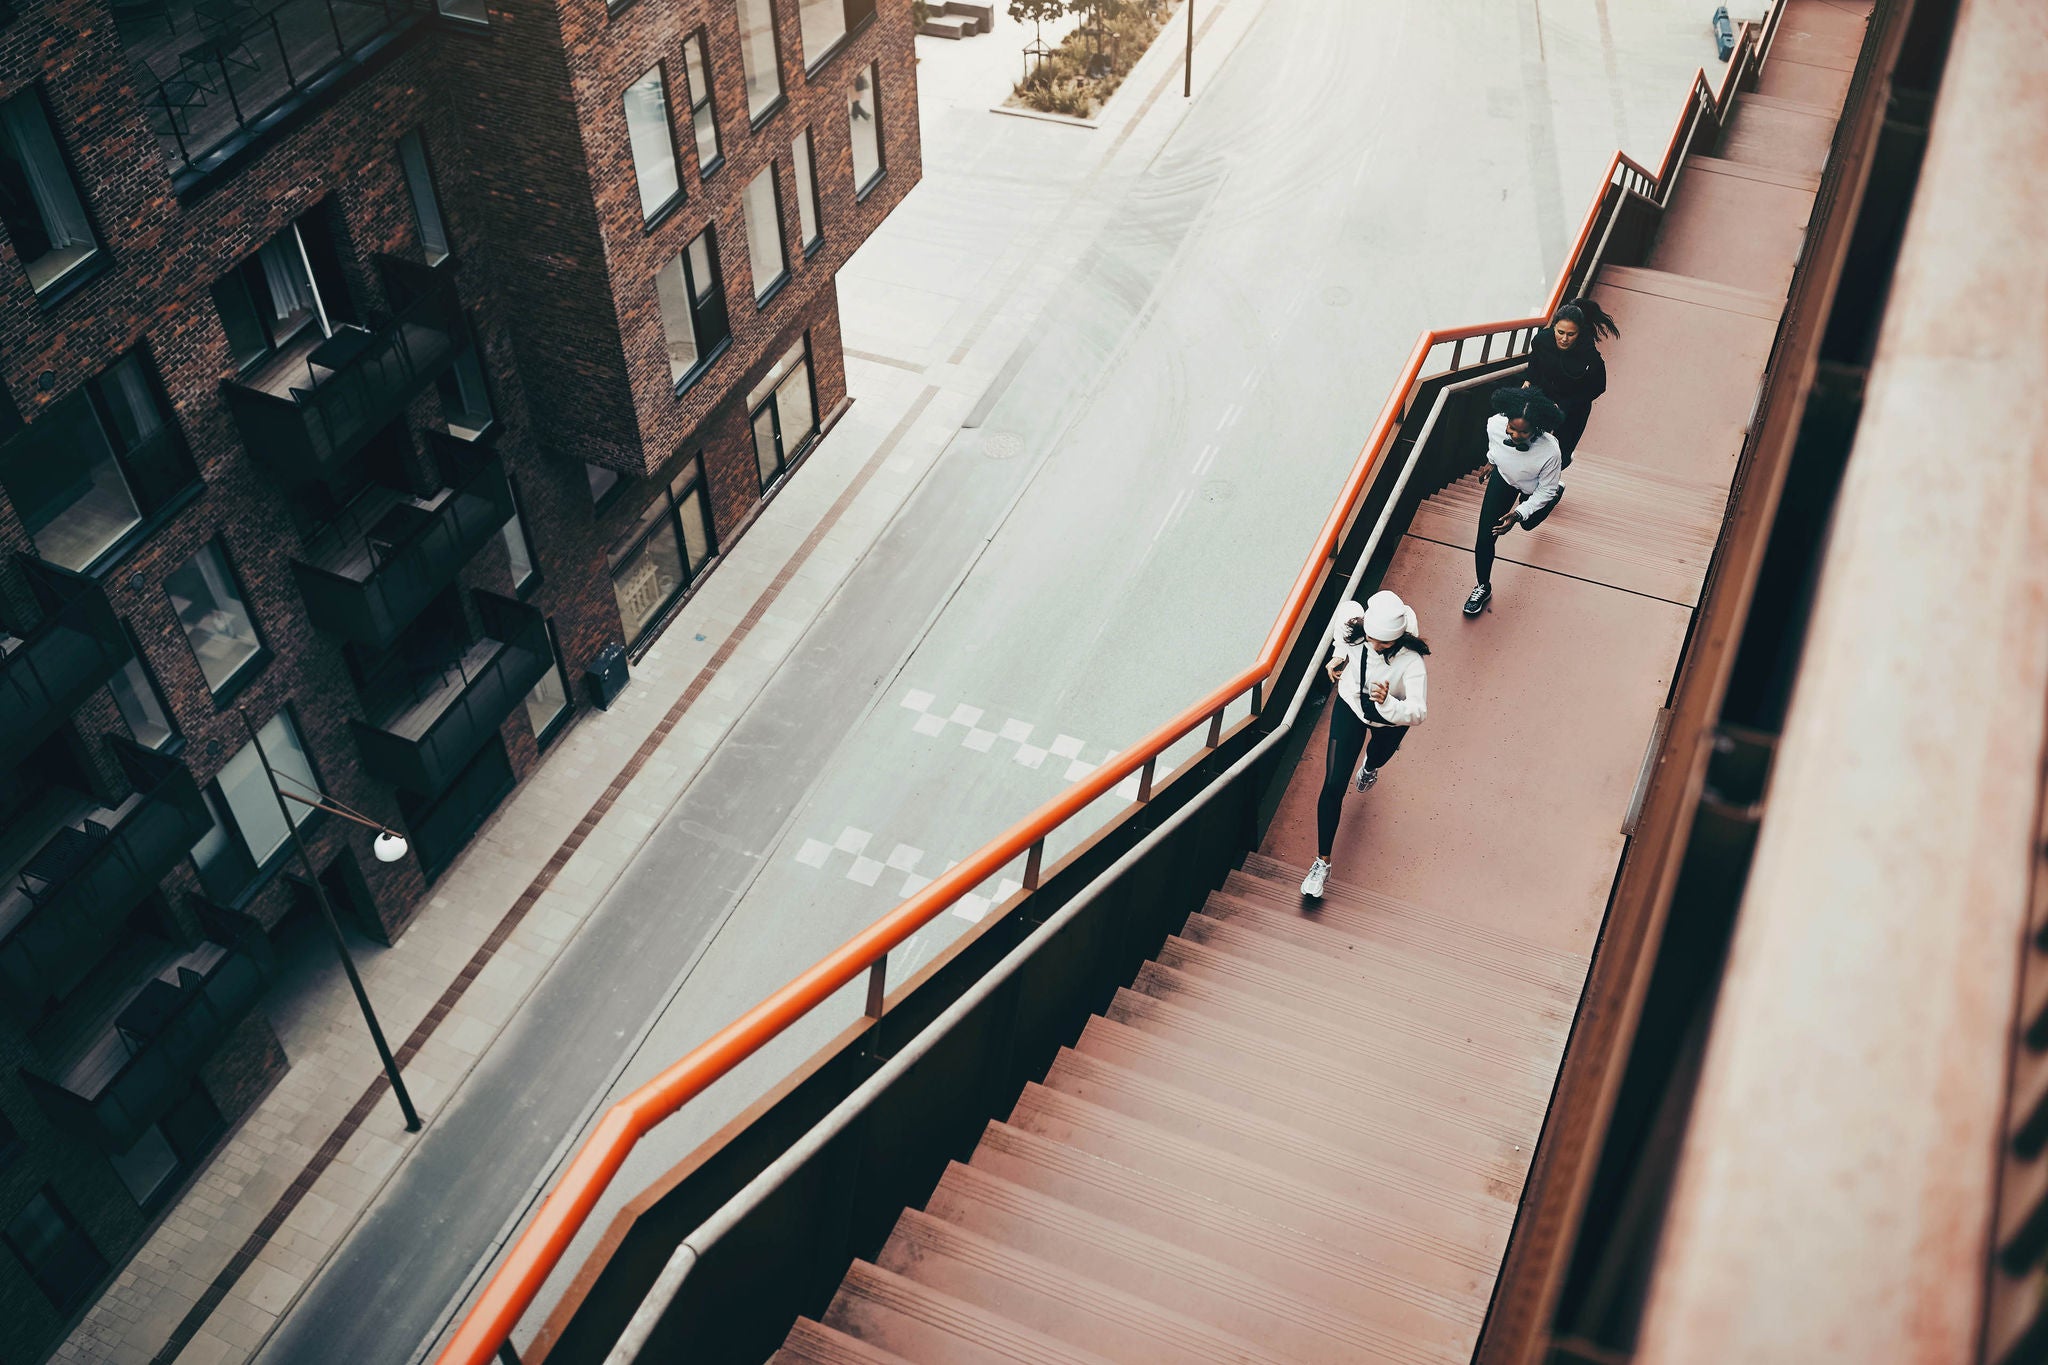 High angle view of a diverse group of women in sportswear running together up some stairs in the city